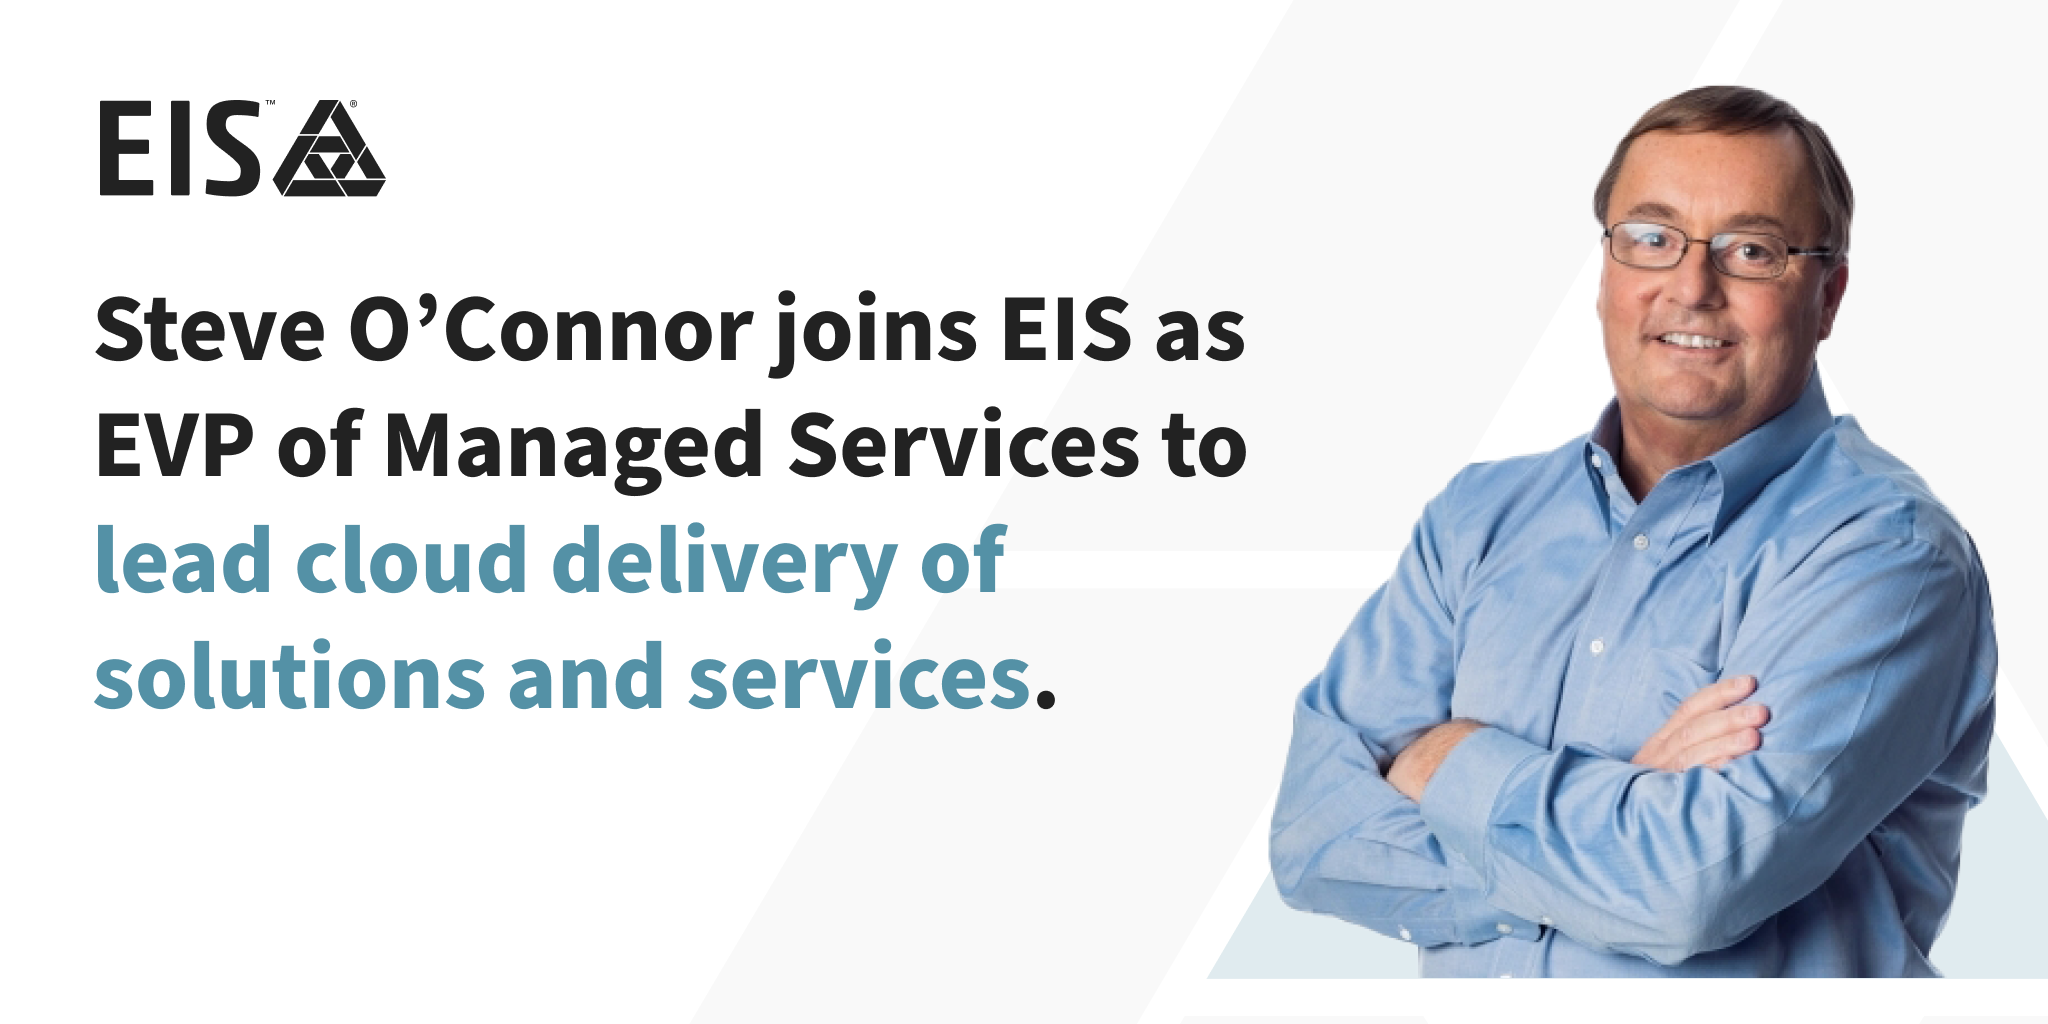 Digital Insurance Platform EIS Appoints Steve O’Connor to Executive  Vice President of Managed Services